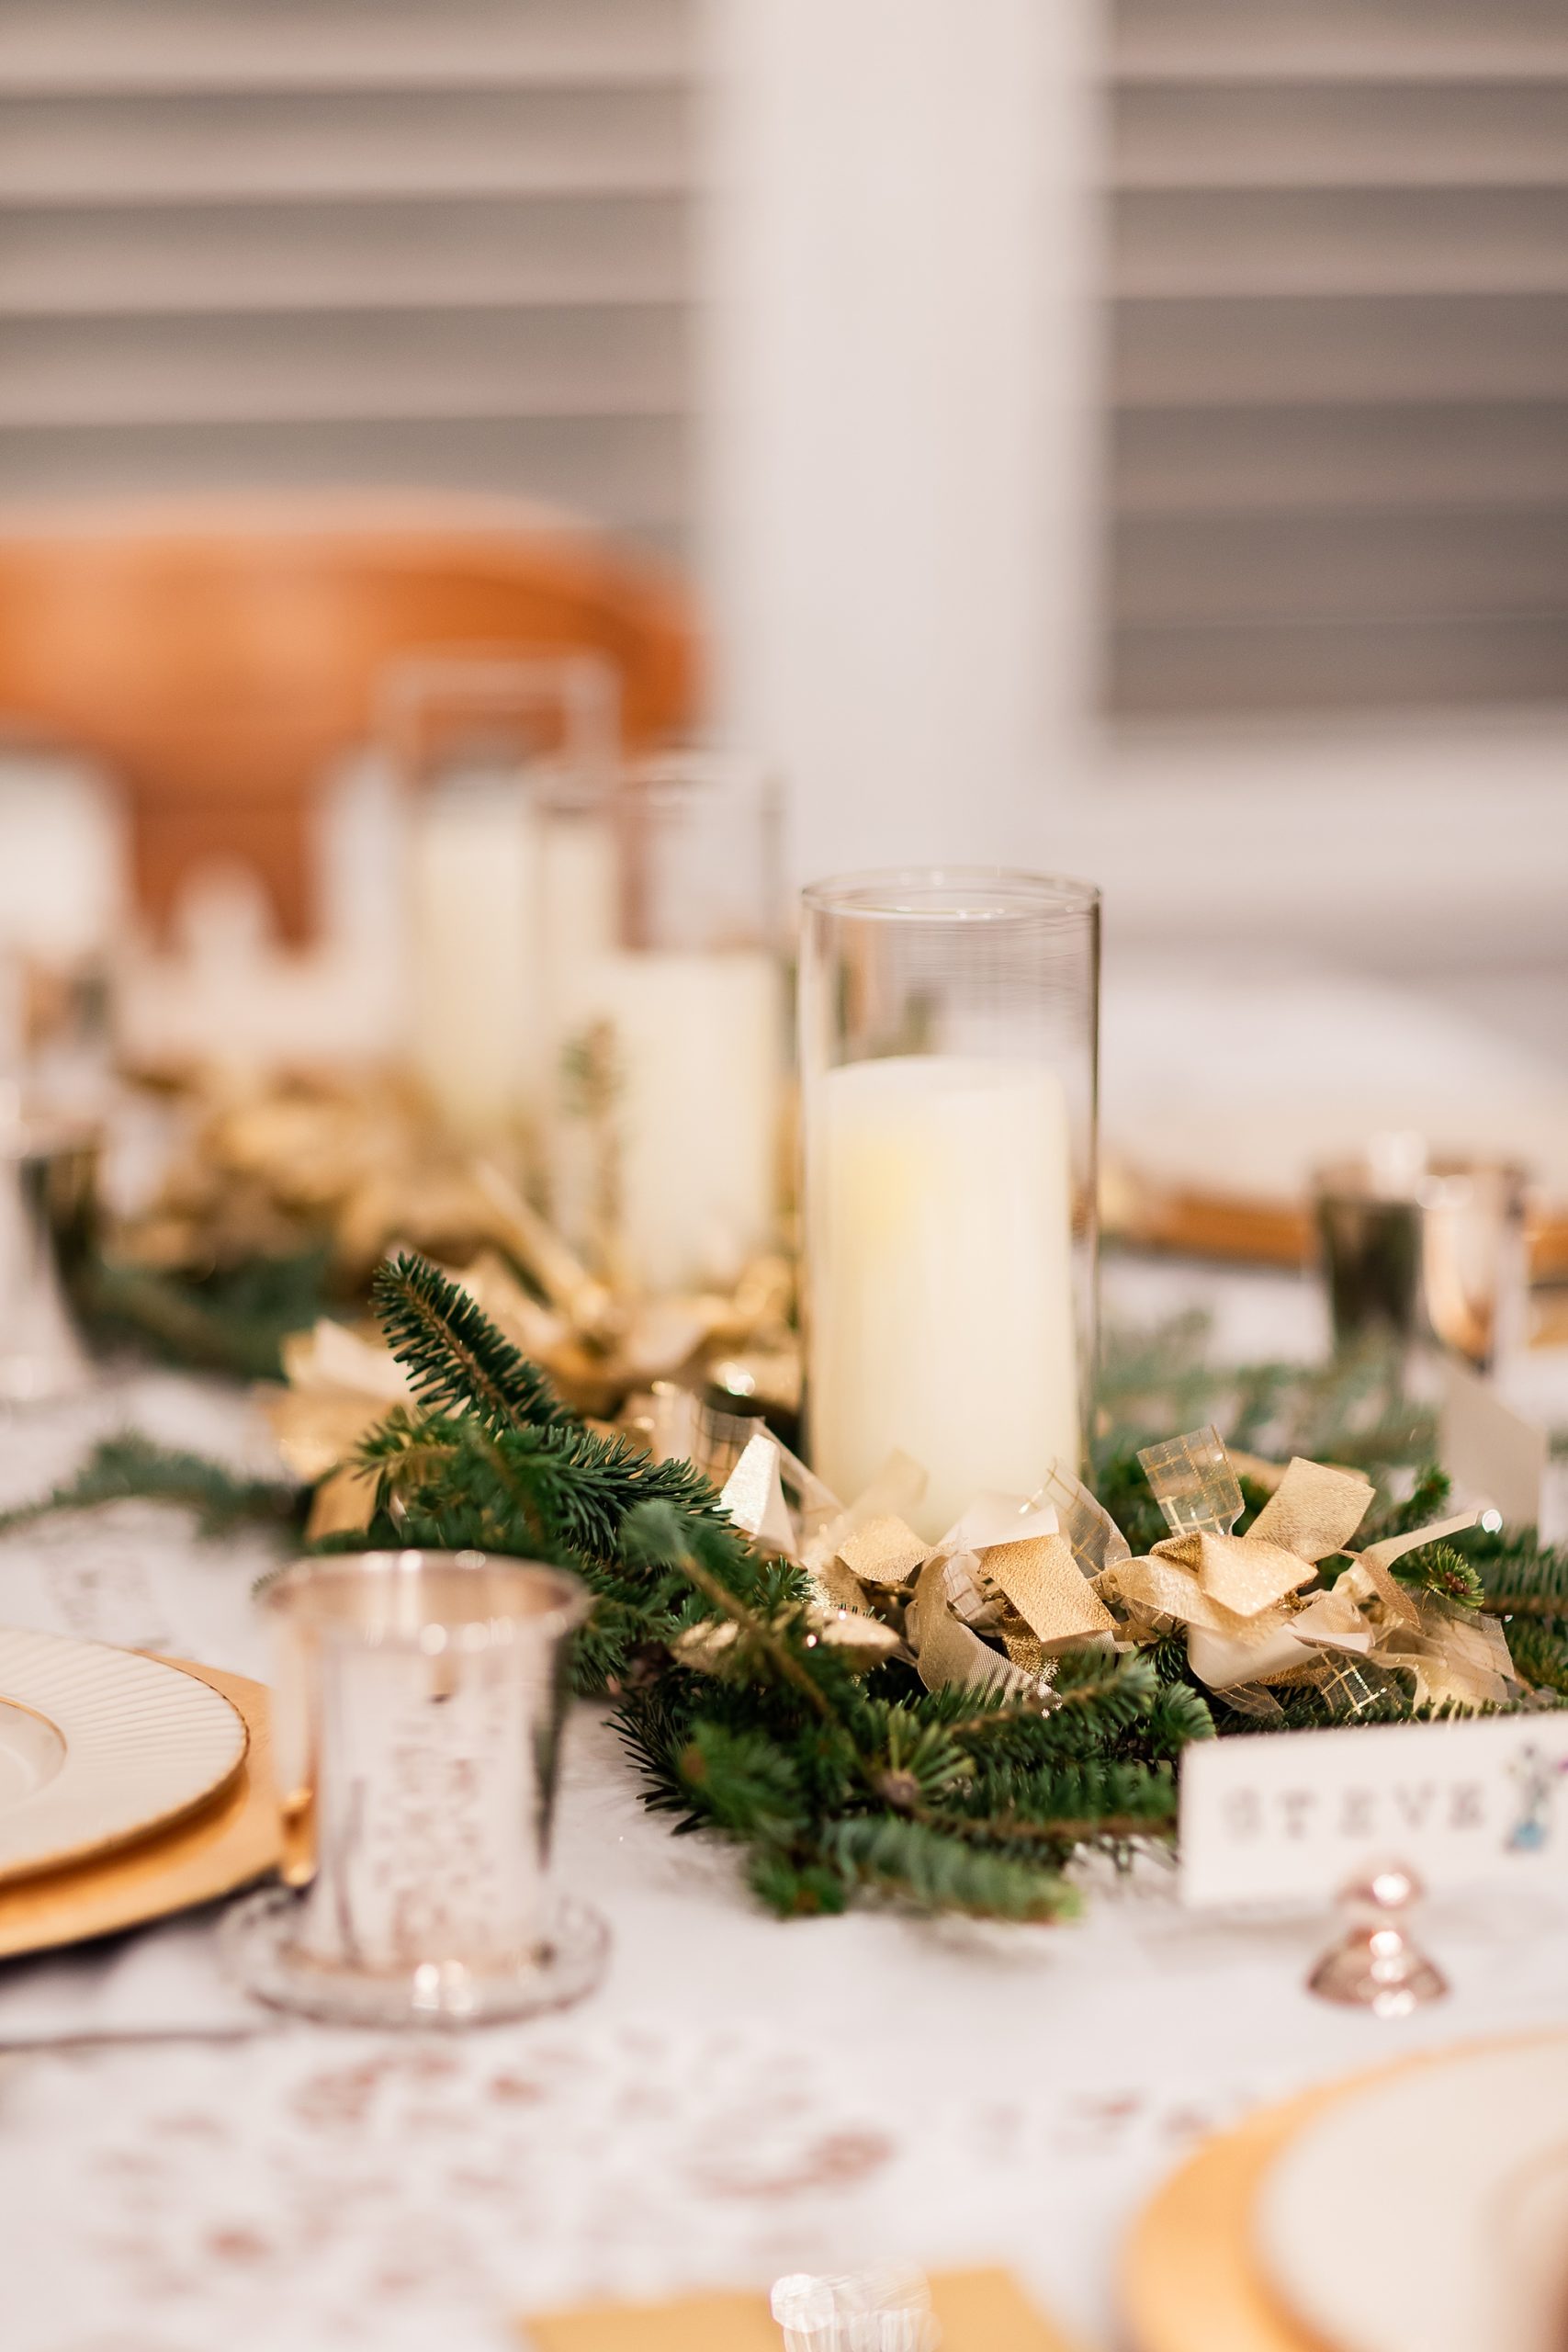 centerpieces with gold and green details for new year's eve wedding 